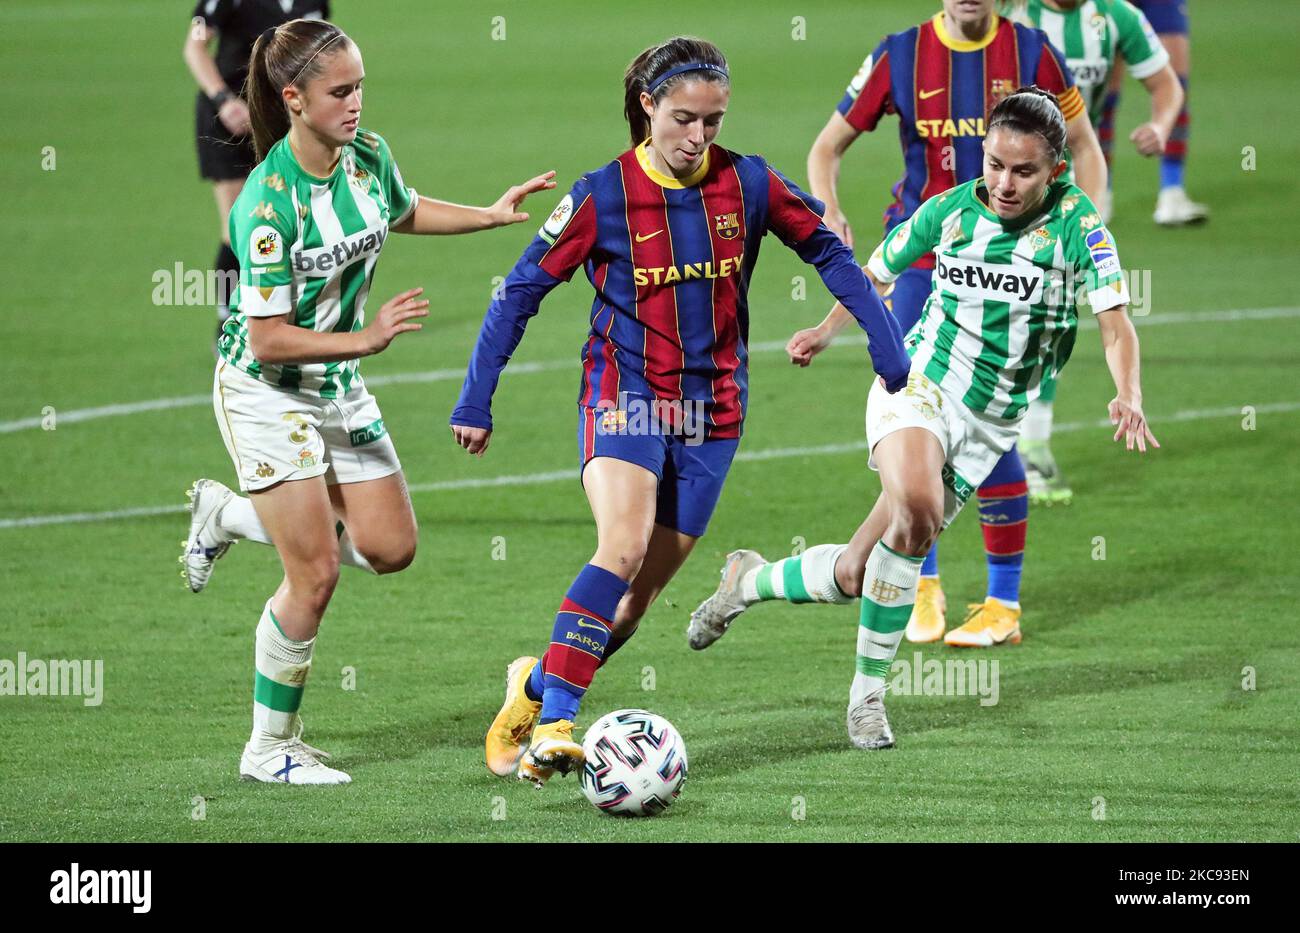 Mapi Leon and Andrea Medina during the match between FC Barcelona and Real Betis Balompie, corresponding to the week 20 of the spanish women's league Primera Iberdrola, played at the Johan Cruyff Stadium, on 10th February 2021, in Barcelona, Spain. -- (Photo by Urbanandsport/NurPhoto) Stock Photo